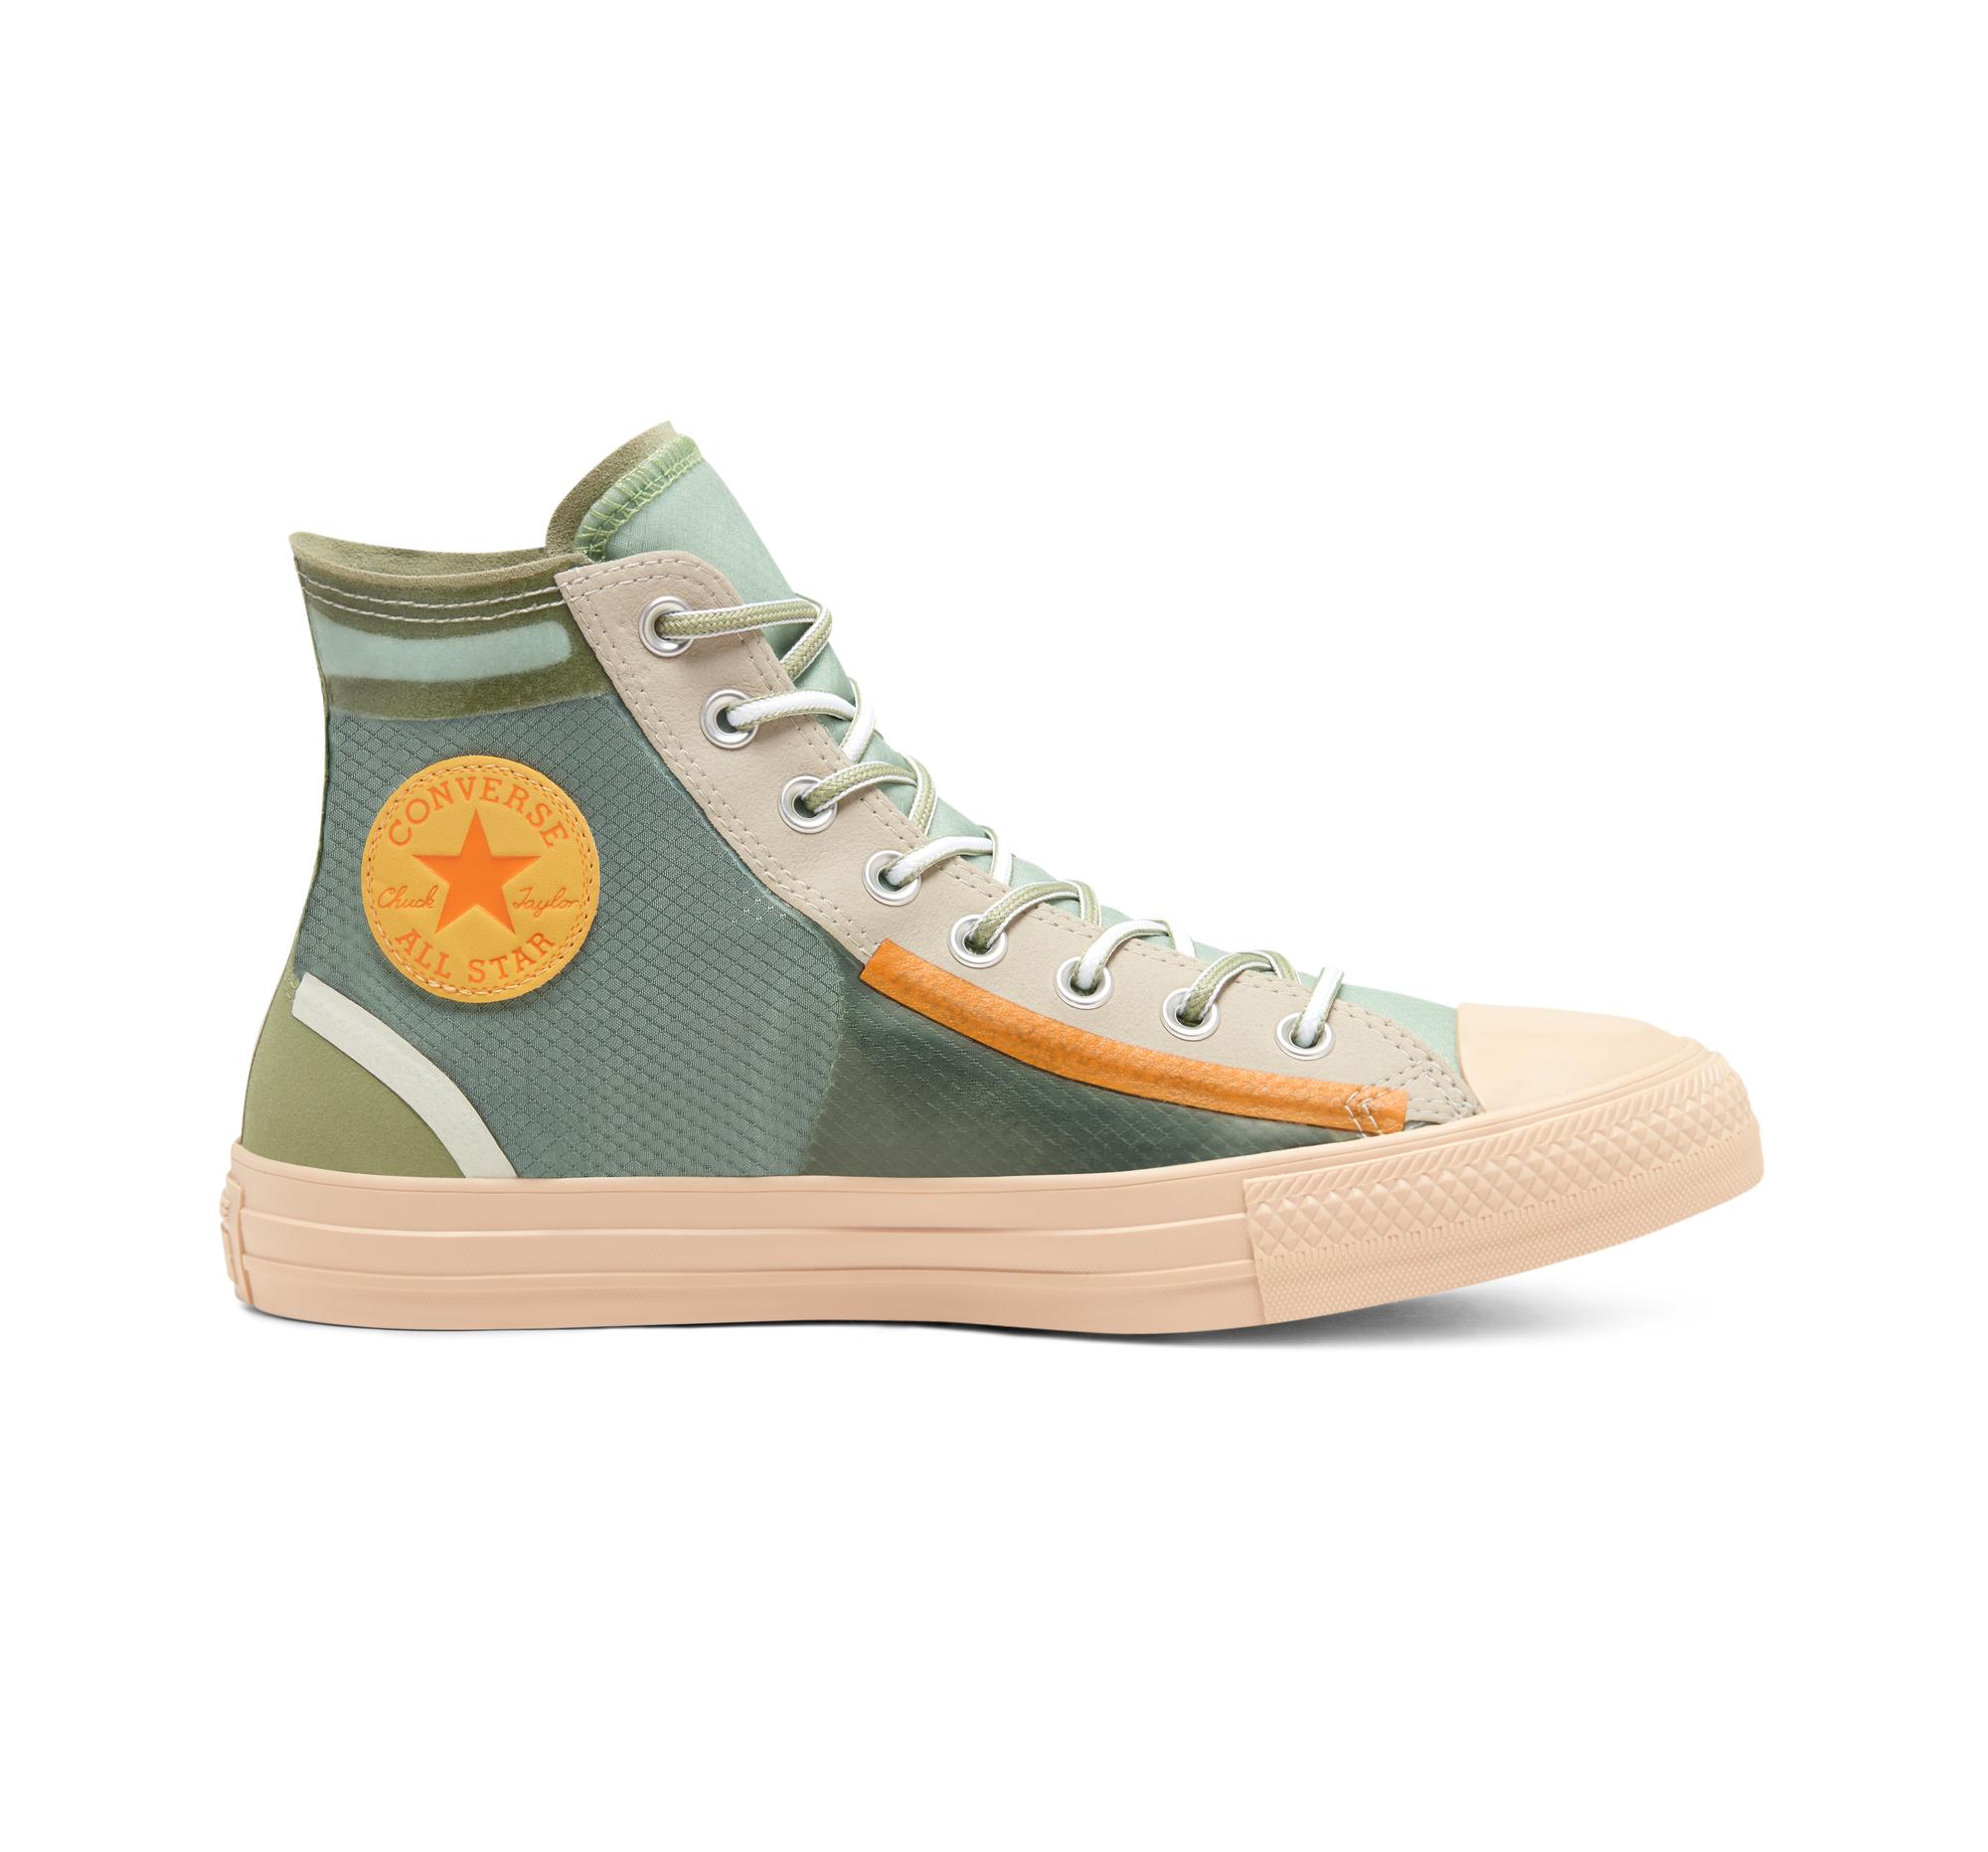 mesh converse Online Shopping for Women, Men, Kids Fashion & Lifestyle|Free  Delivery & Returns! -